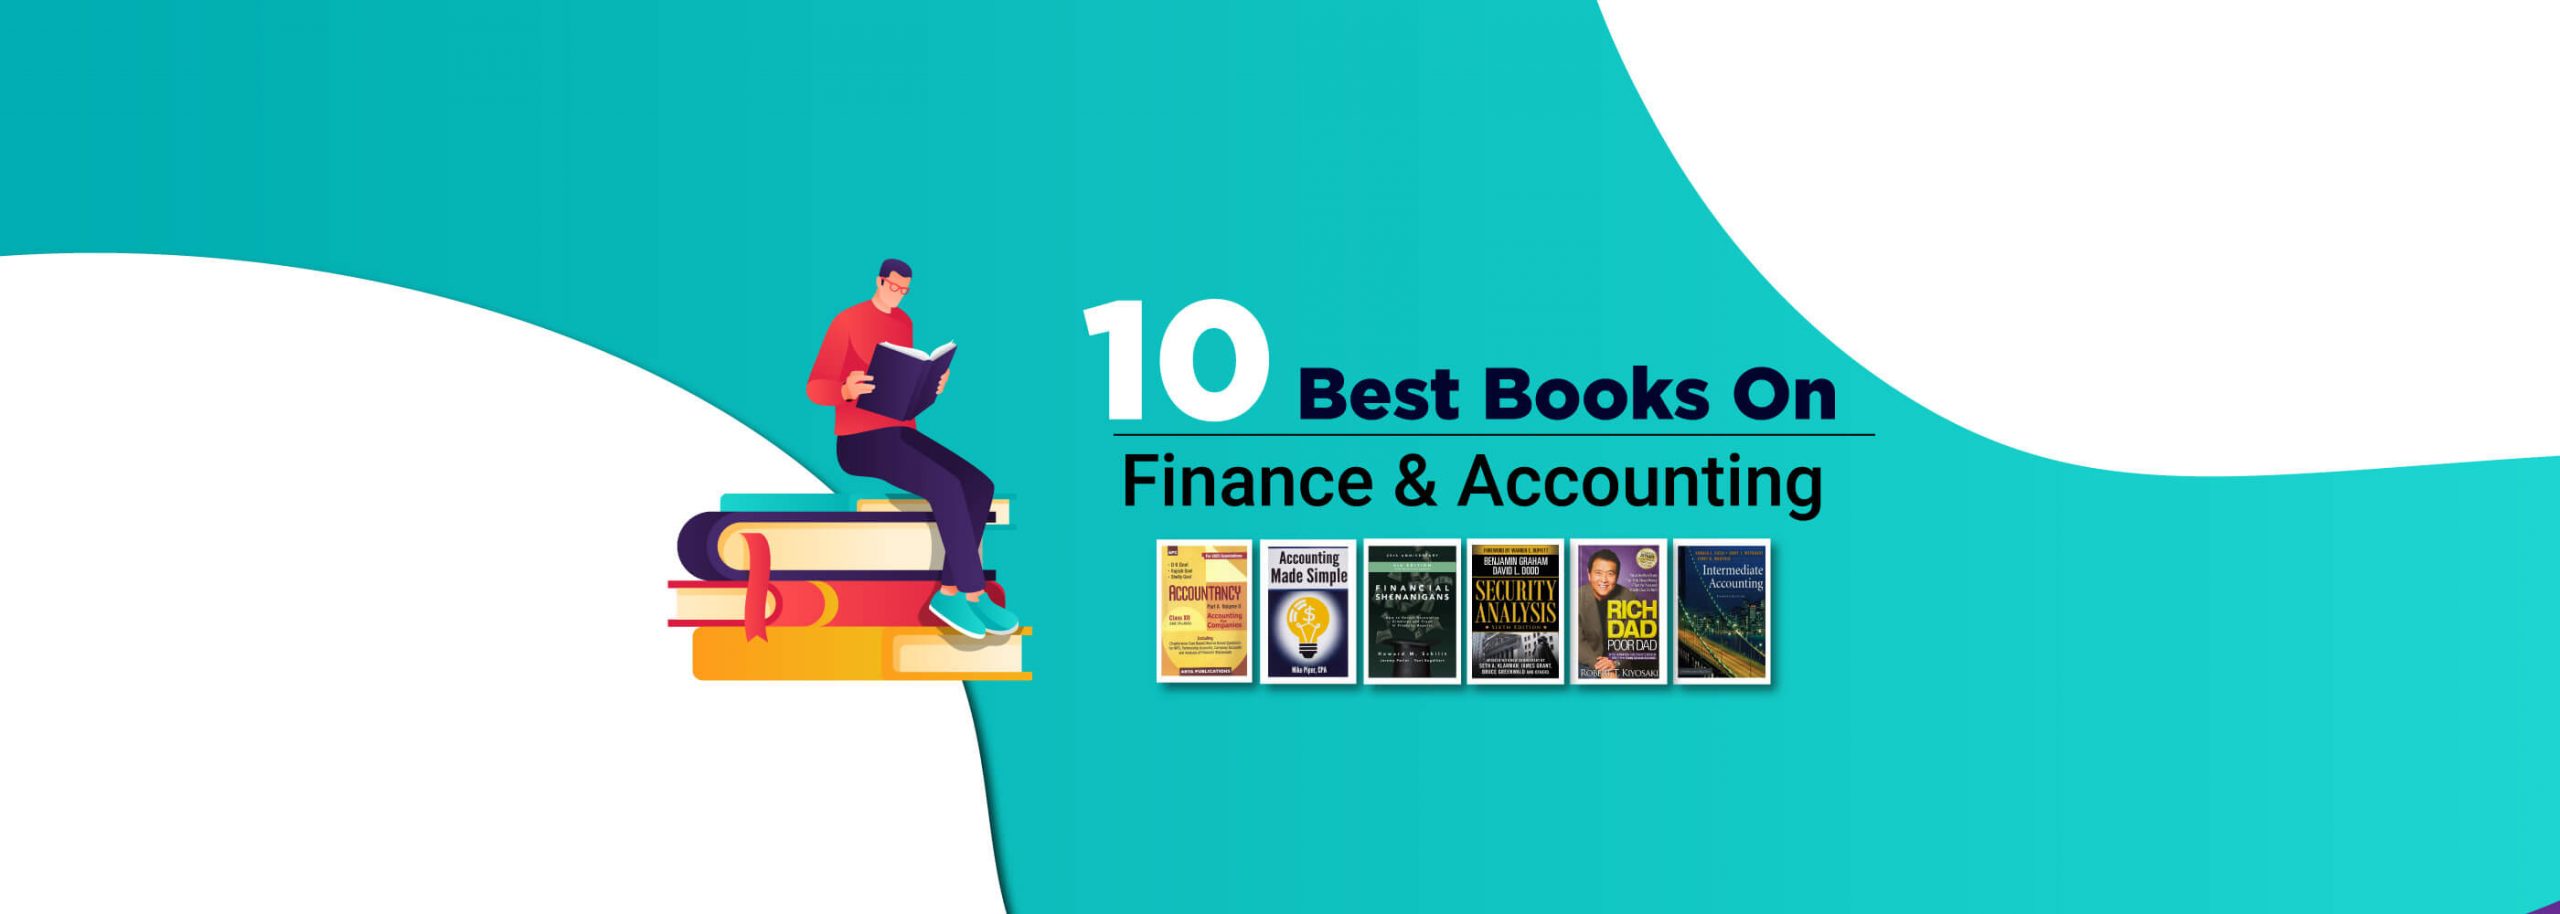 best books on finance and accounting